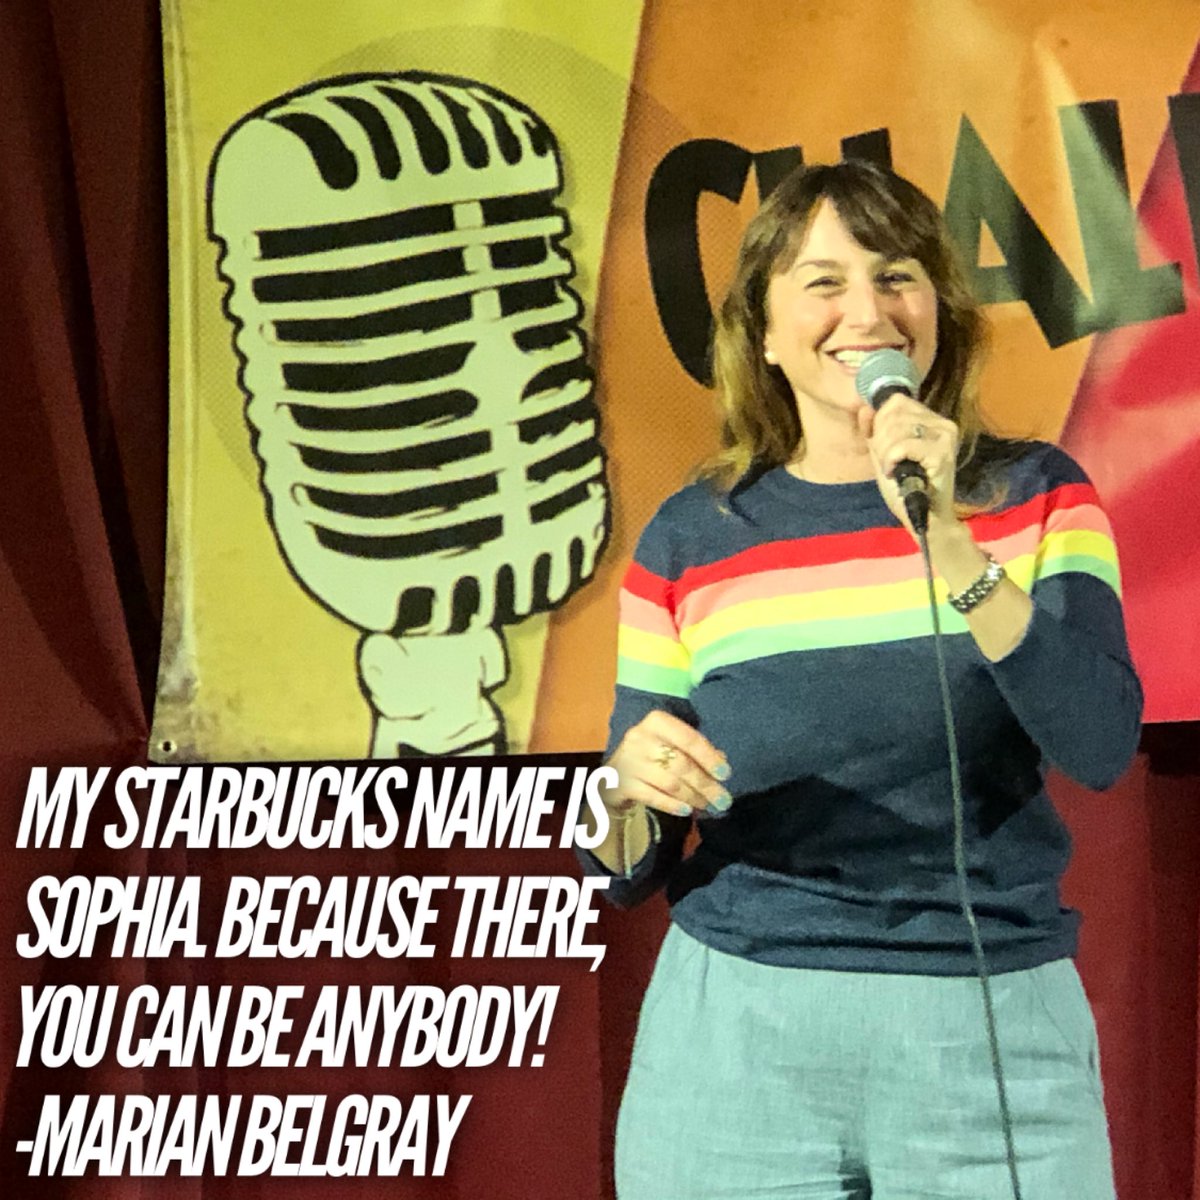 Thanks for sharing the laughs with us @marianbelgray 
Happy Monday!
#Comedy #funnyfemales #starbucks #coffee #thechallengemic